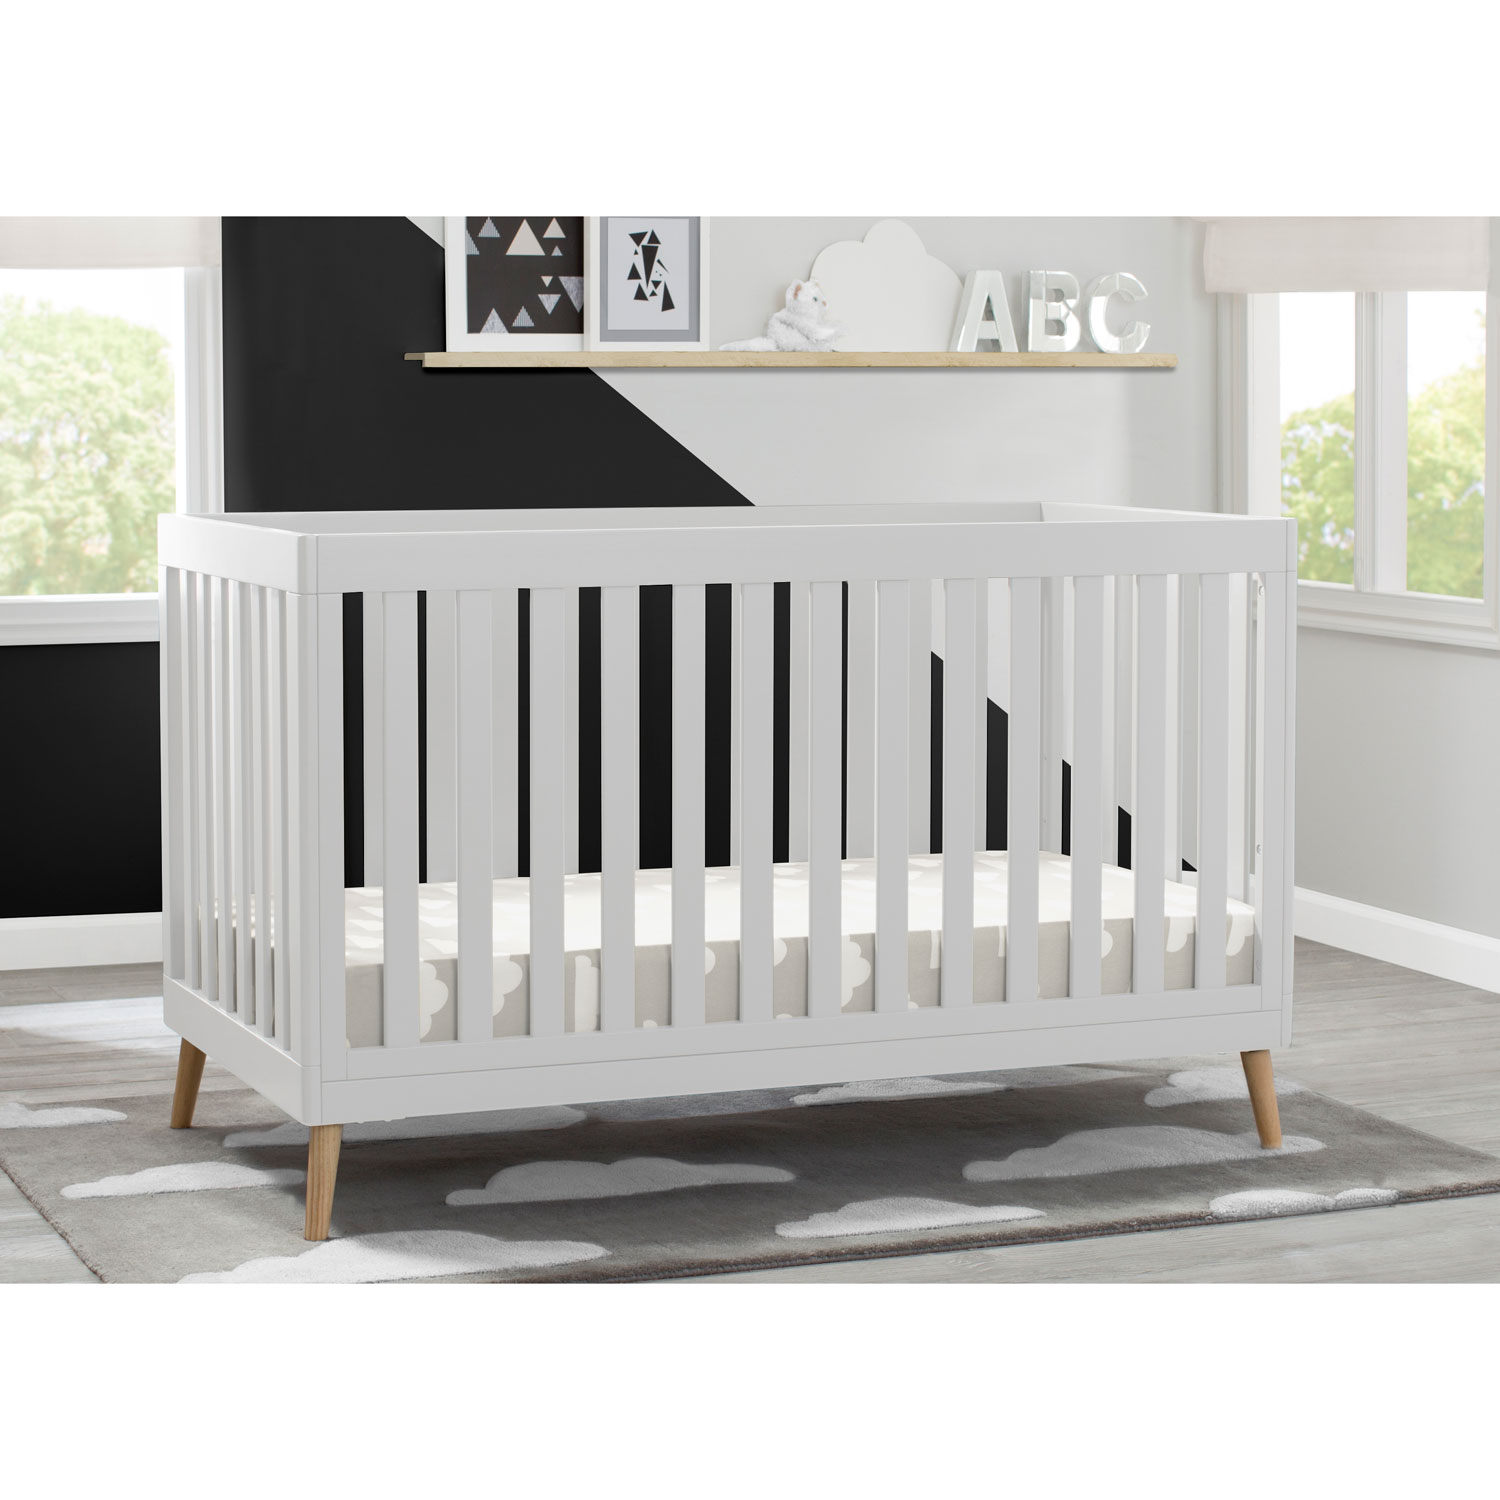 Fizzy Classic Toddler Bed Wooden Safety Rails 